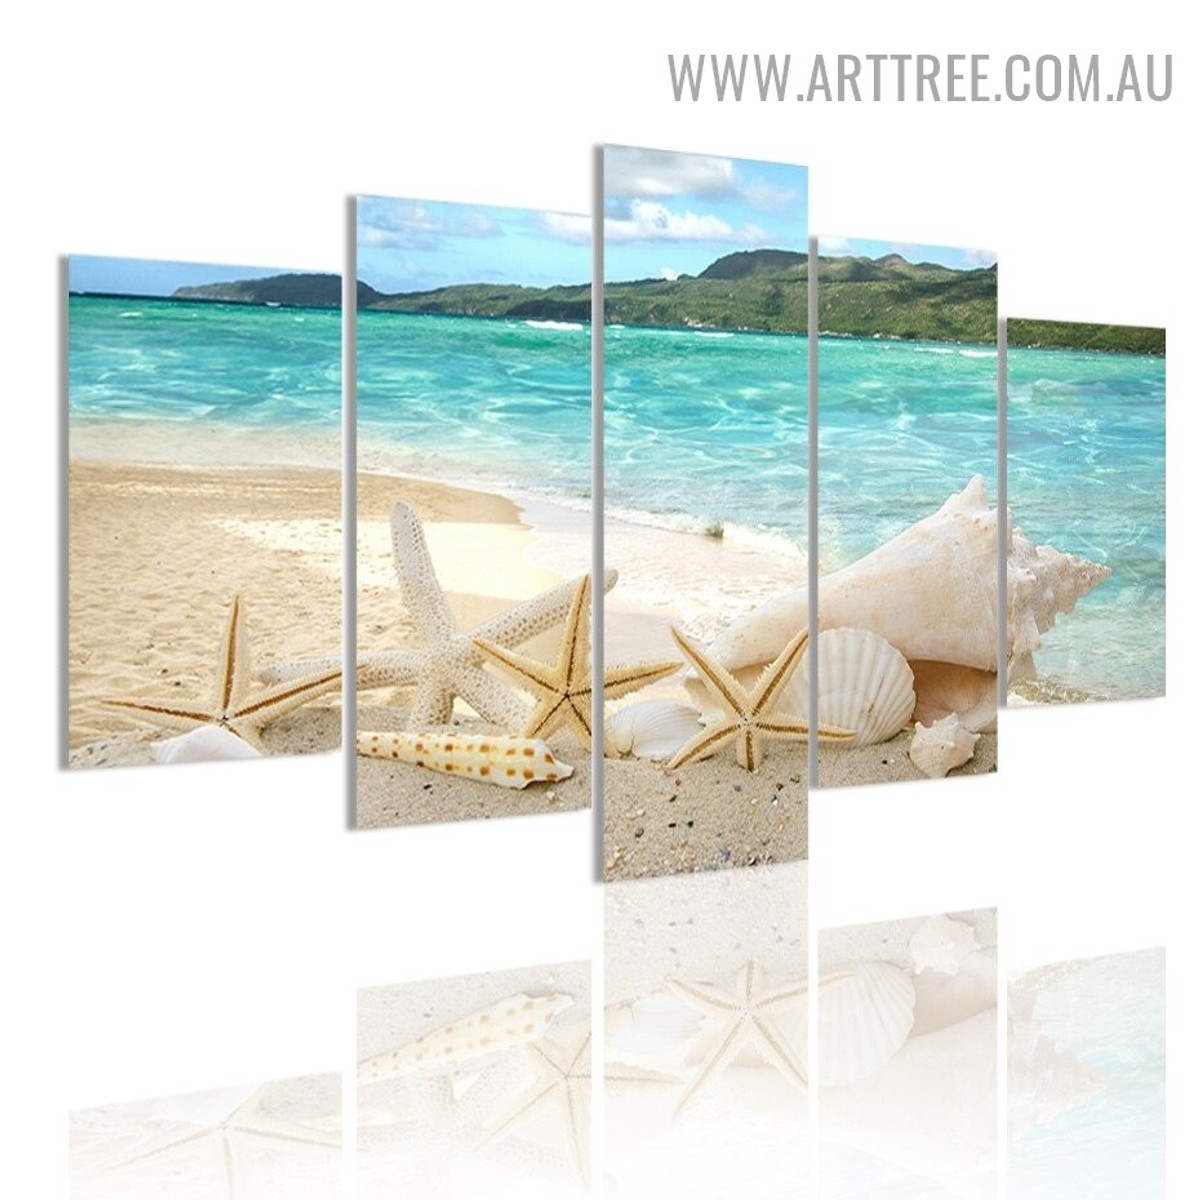 Seashell Beach Land 5 Piece Multi Panel Naturescape Image Modern Canvas Painting Print for Room Wall Decor